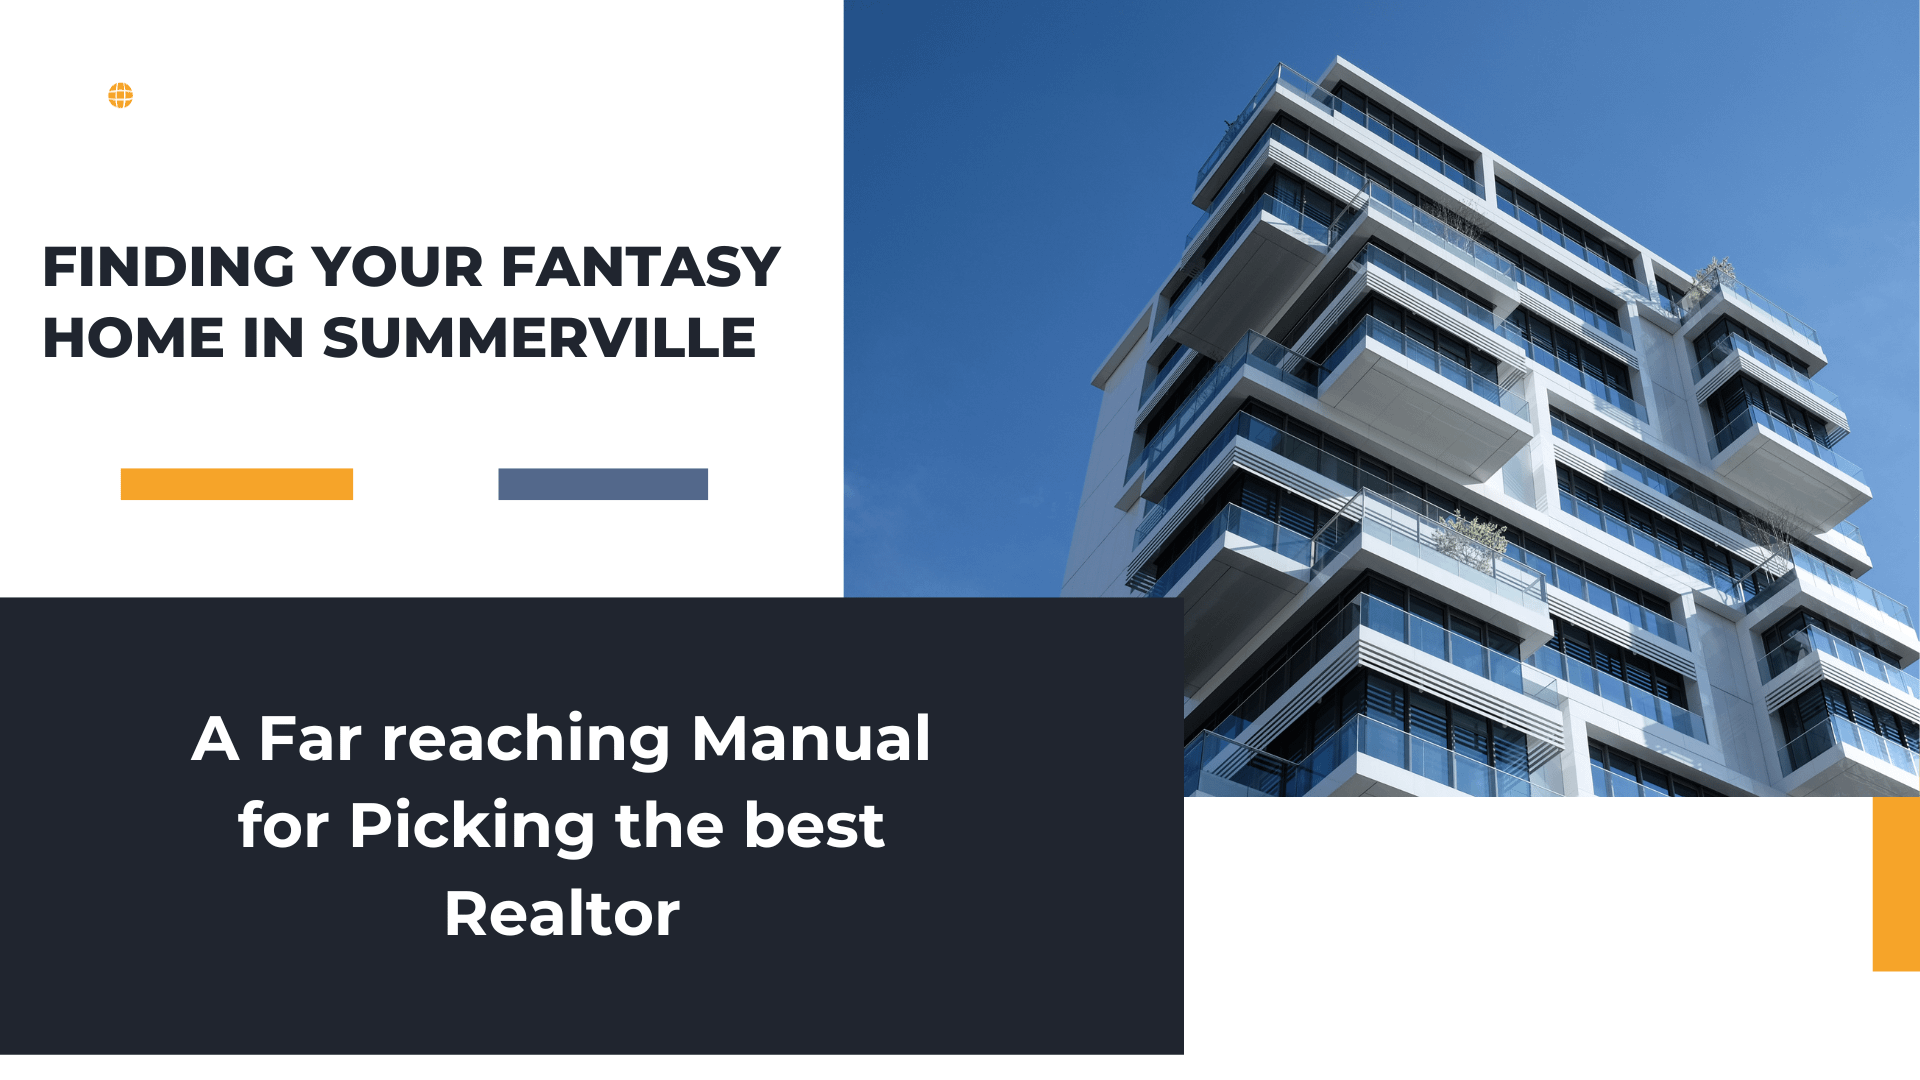 Finding Your Fantasy Home in Summerville: A Far reaching Manual for Picking the best Realtor